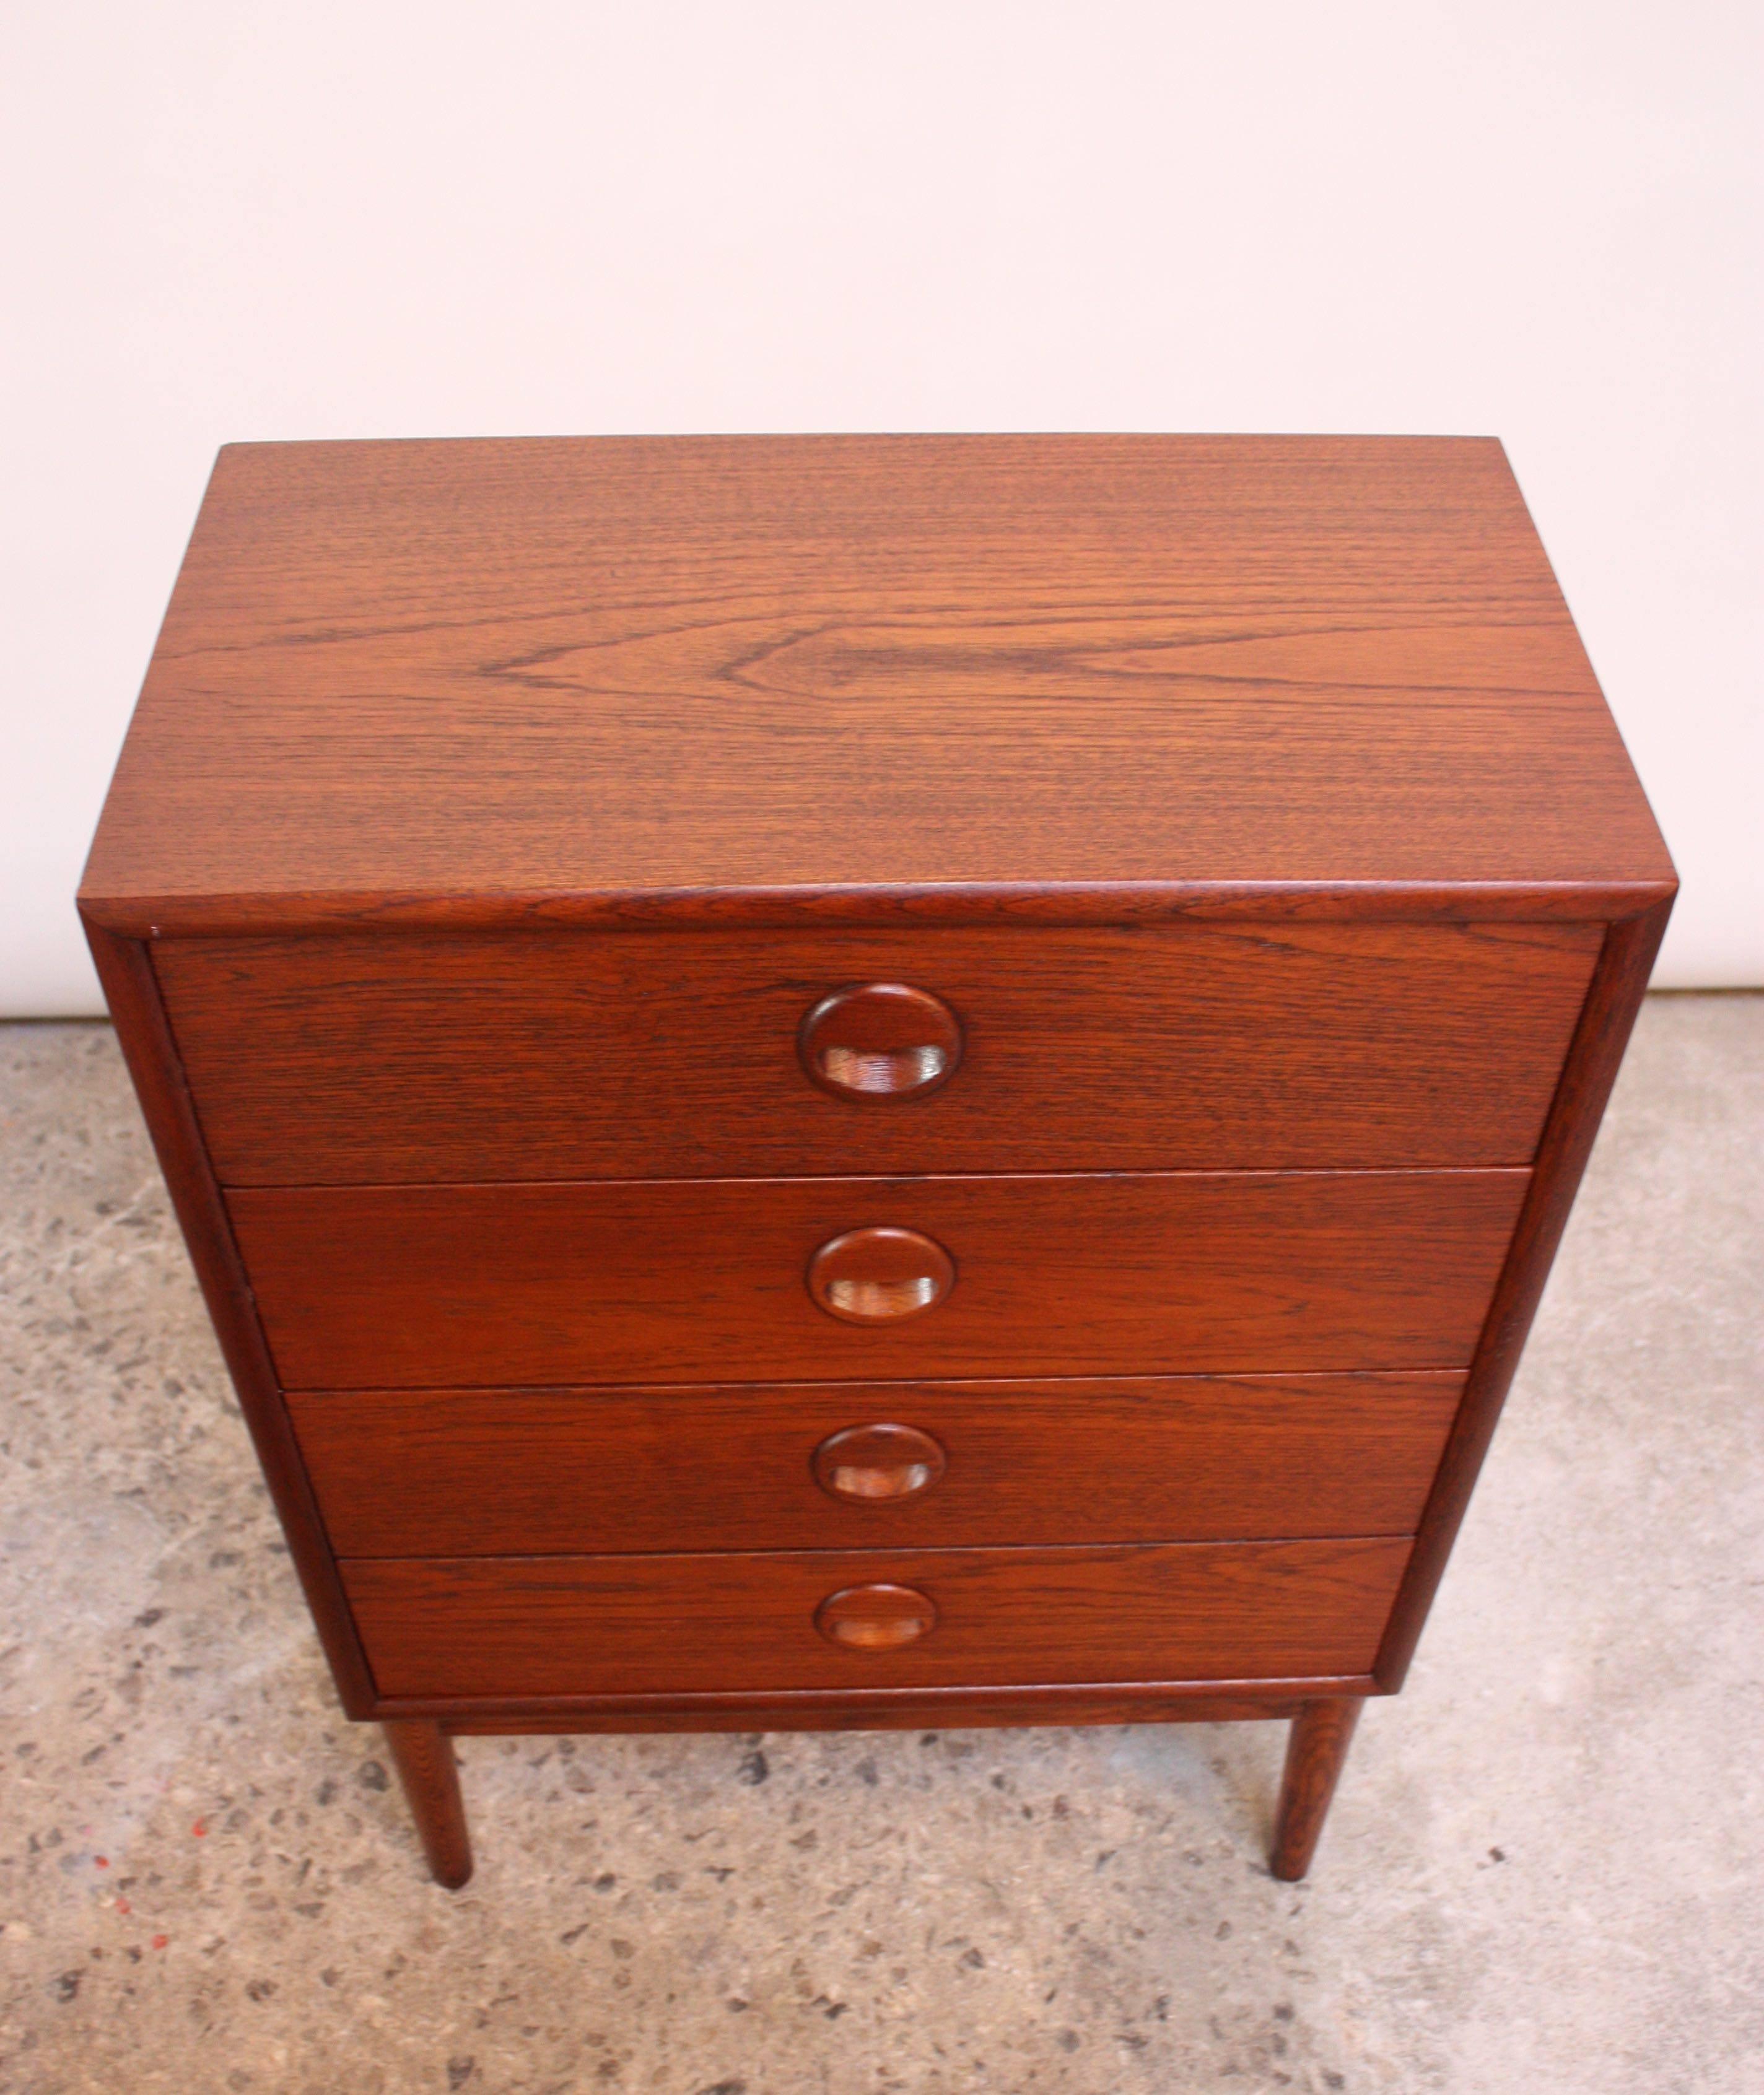 1960s Danish four-drawer teak chest with round eyelid drawer pulls on tapered oak legs.
Diminutive size (21.1